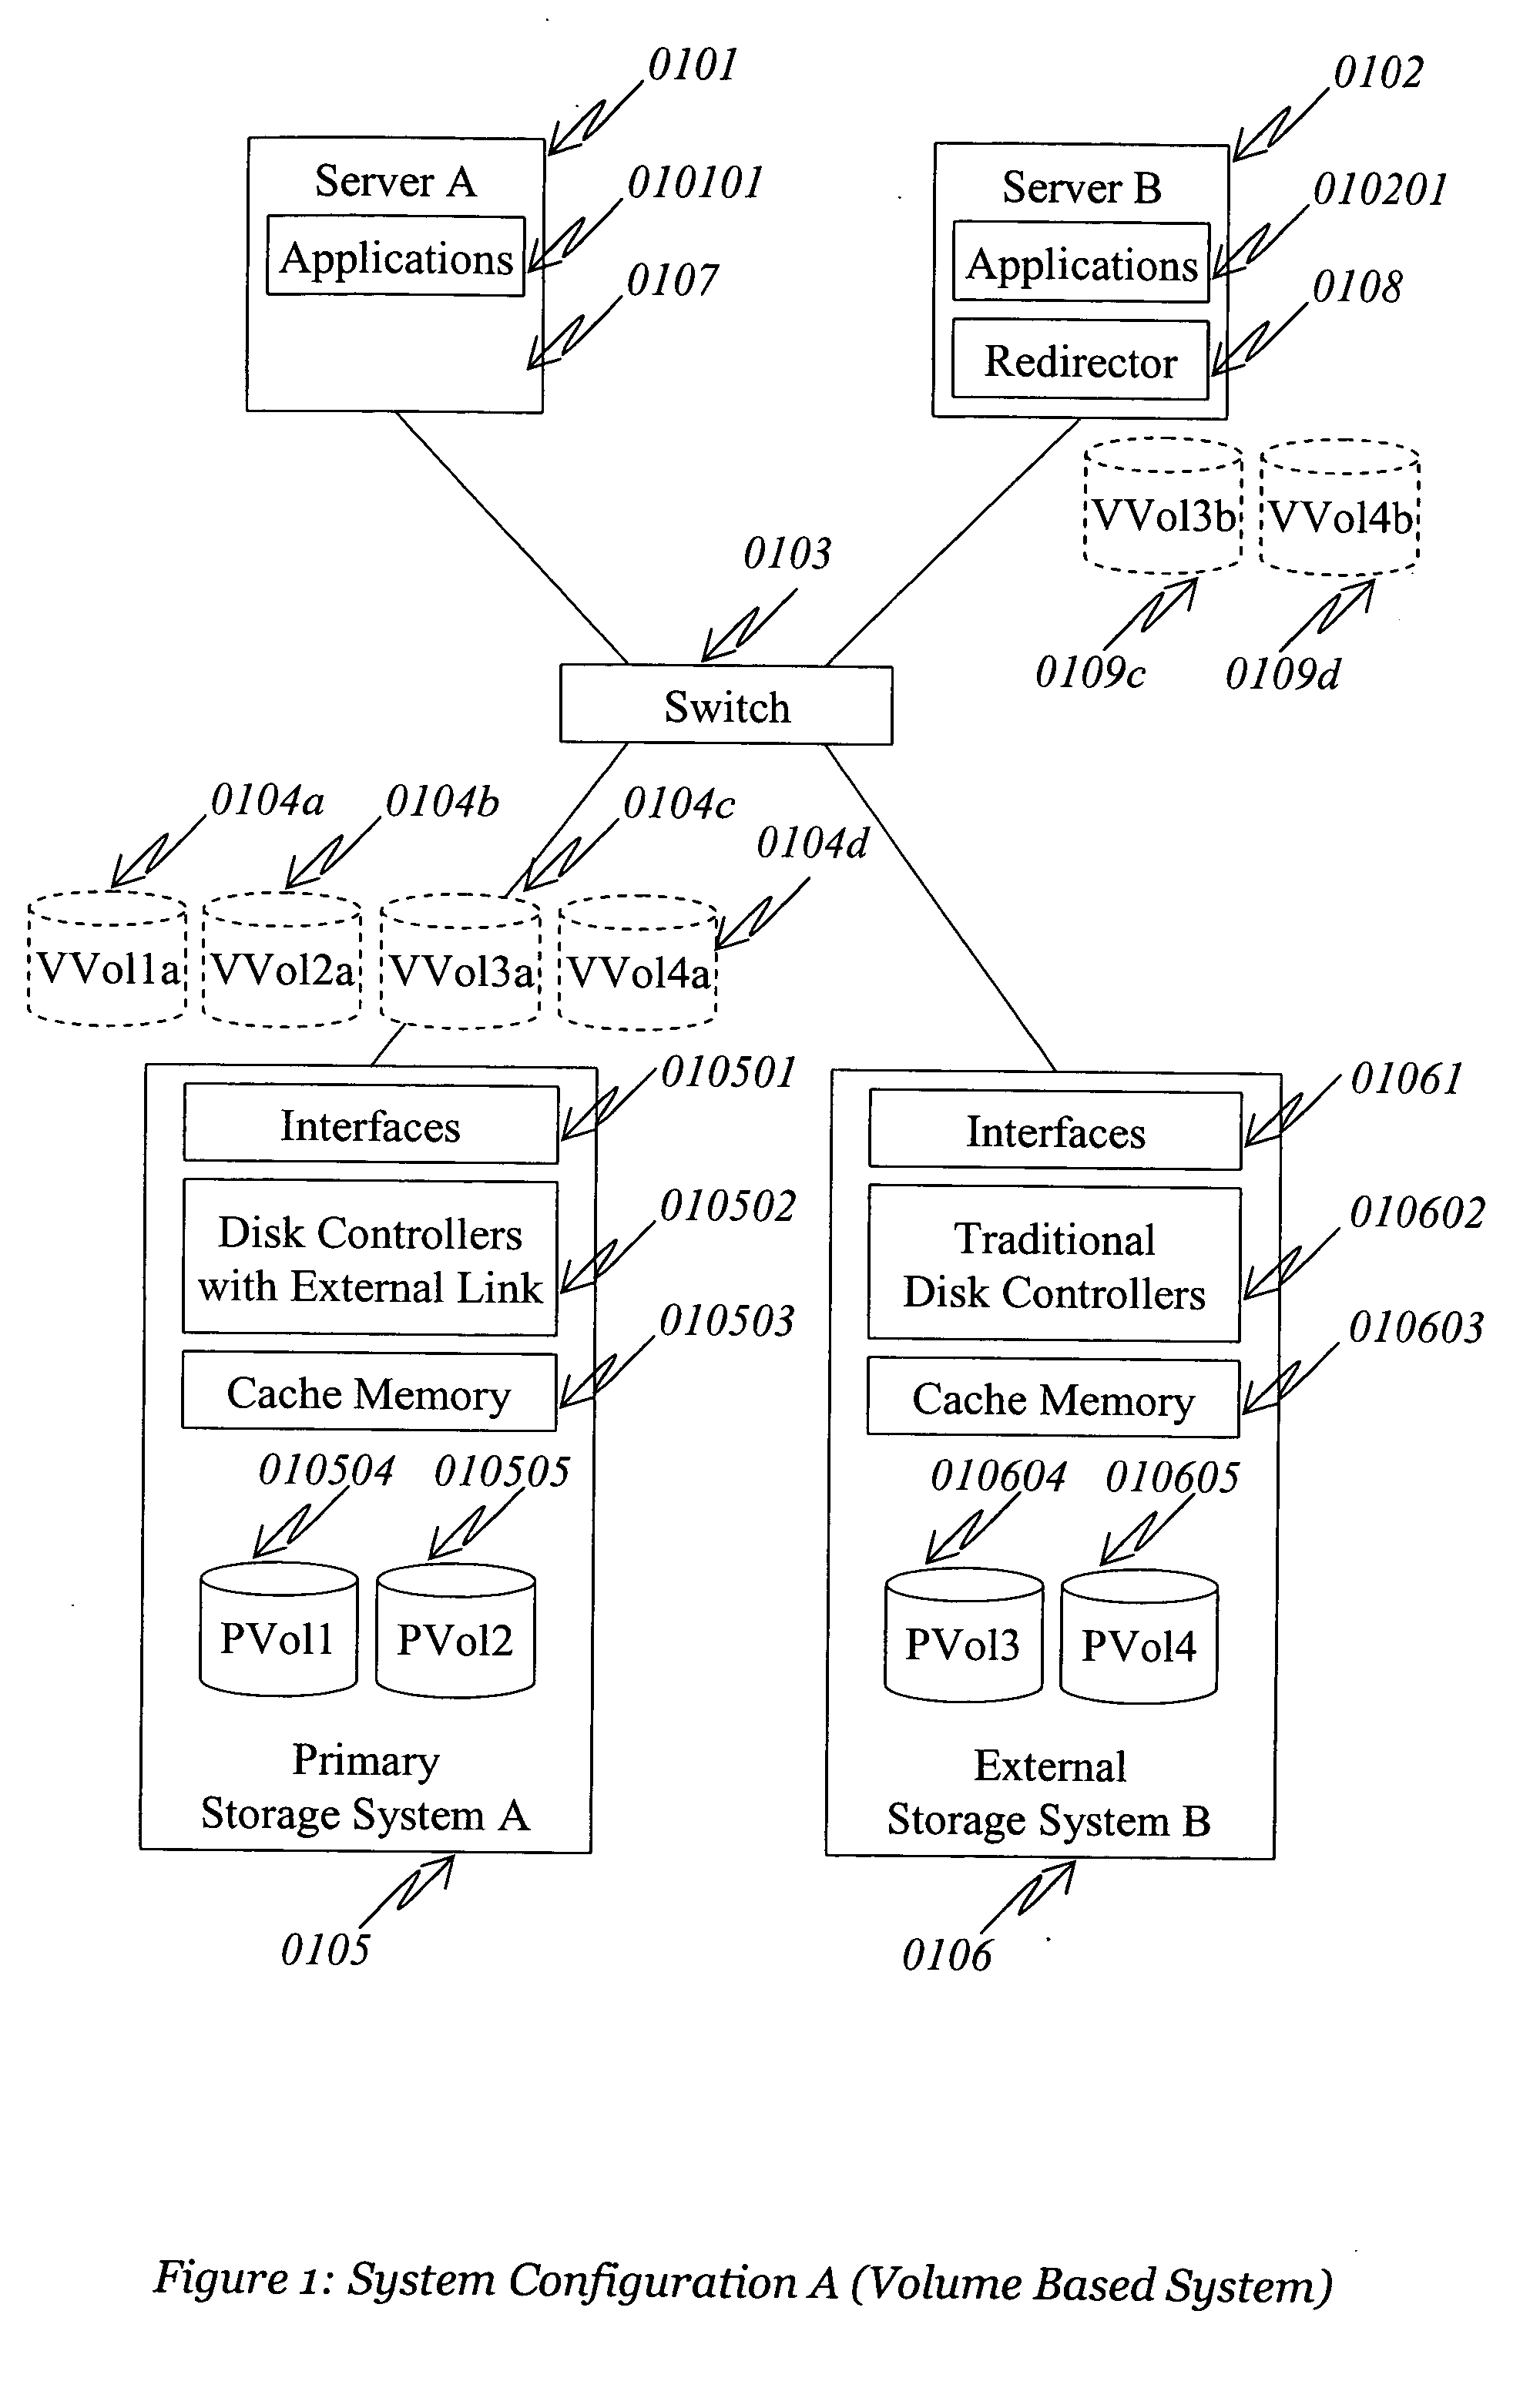 Method and system for data lifecycle management in an external storage linkage environment